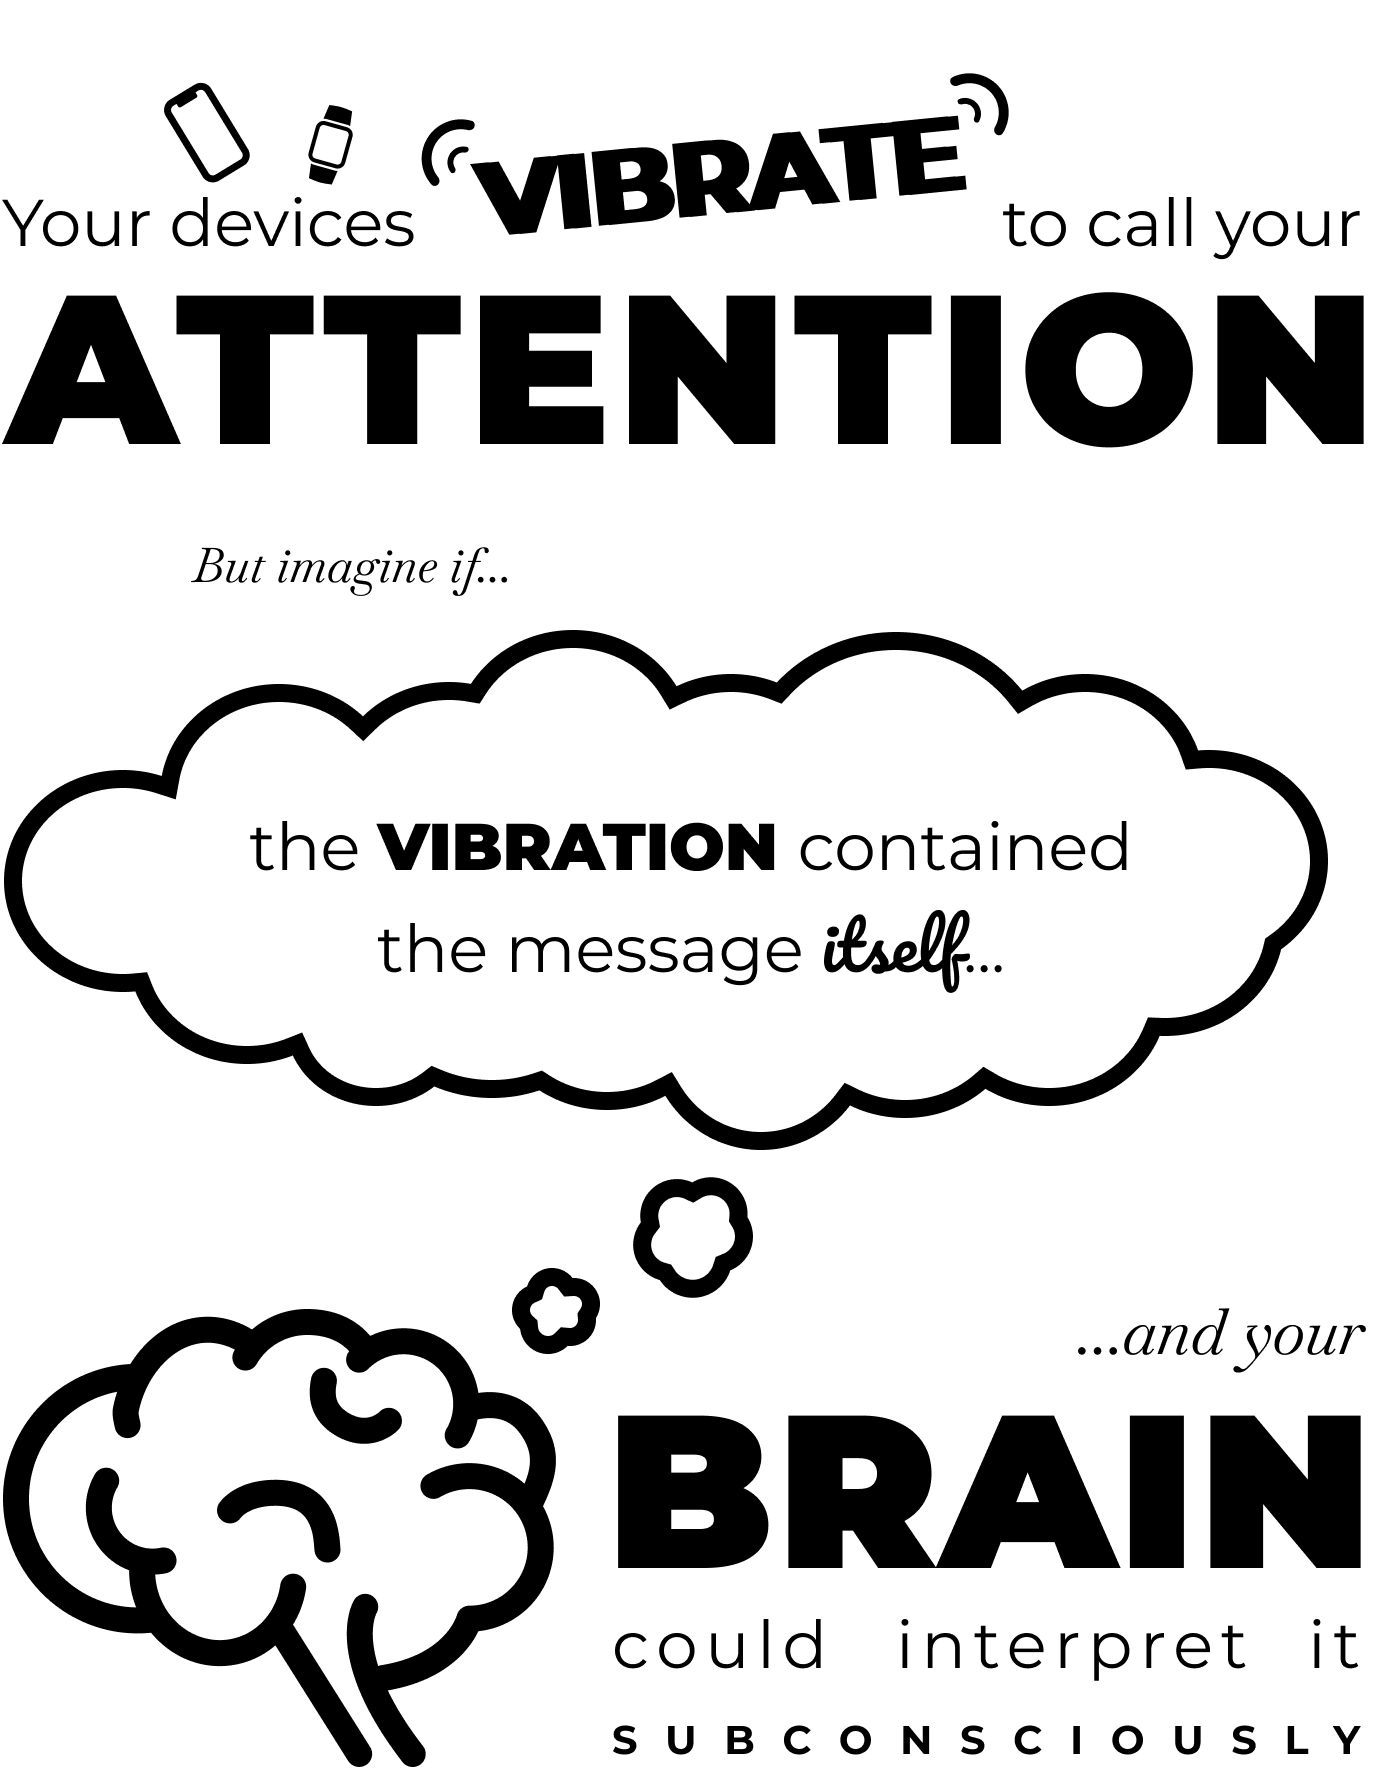 Your devices vibrate to call your attention. But imagine if the vibration contained the message itself and your brain could interpret it subconsciously.